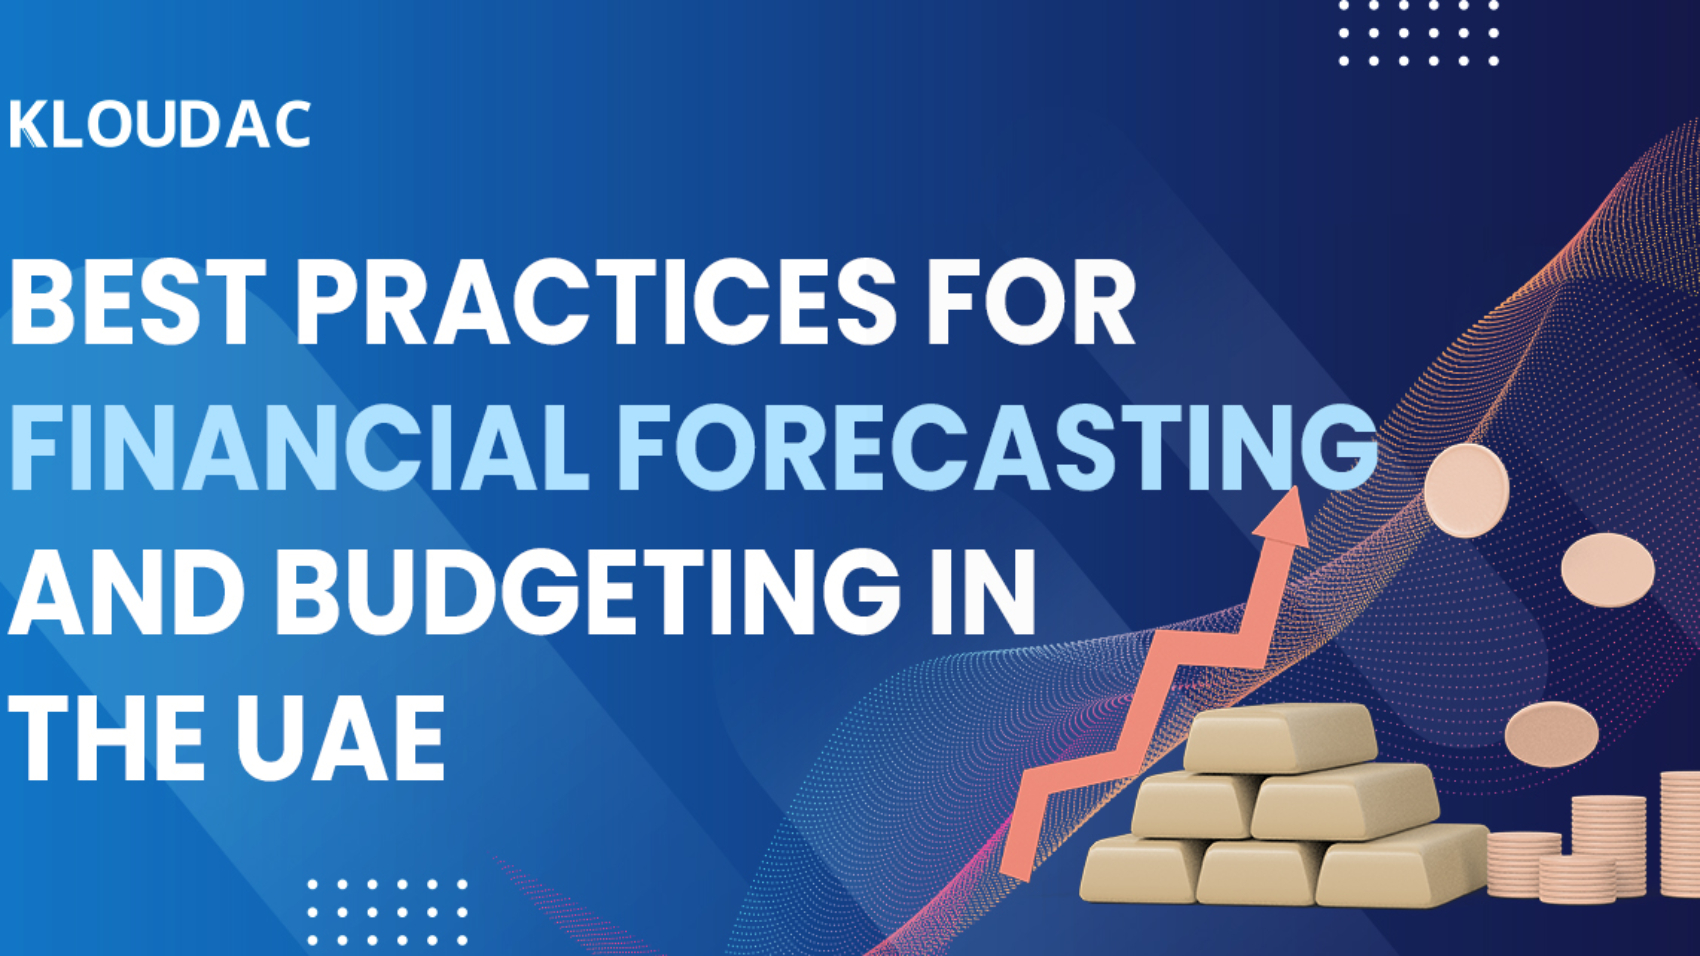 Best practices for financial forecasting and budgeting in the UAE